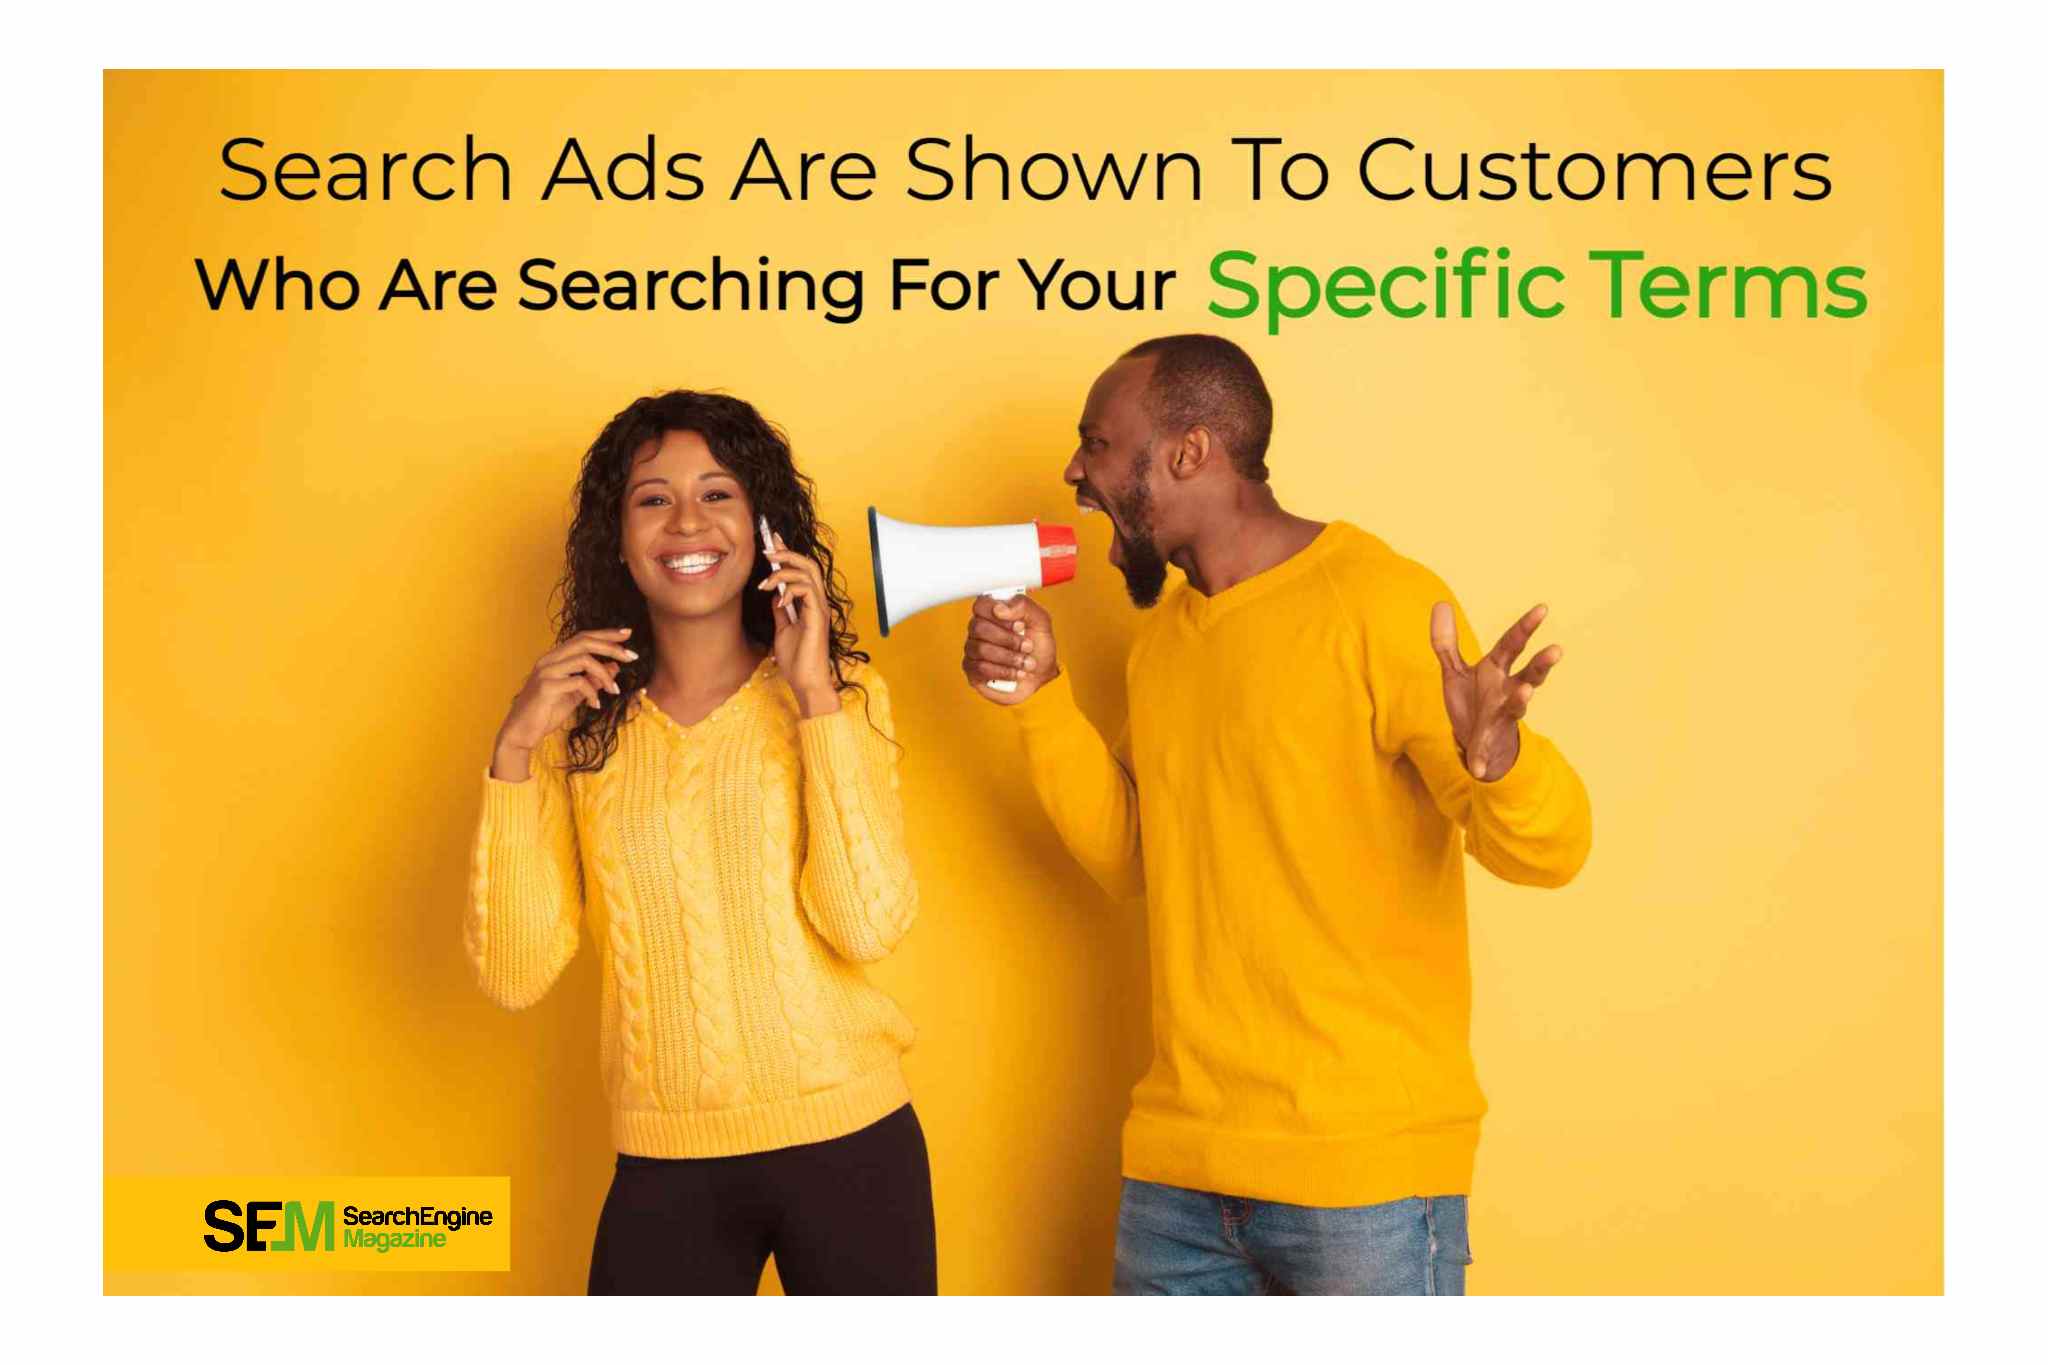 Which Of The Following Is A Benefit Of Search Advertising Over Display Advertising